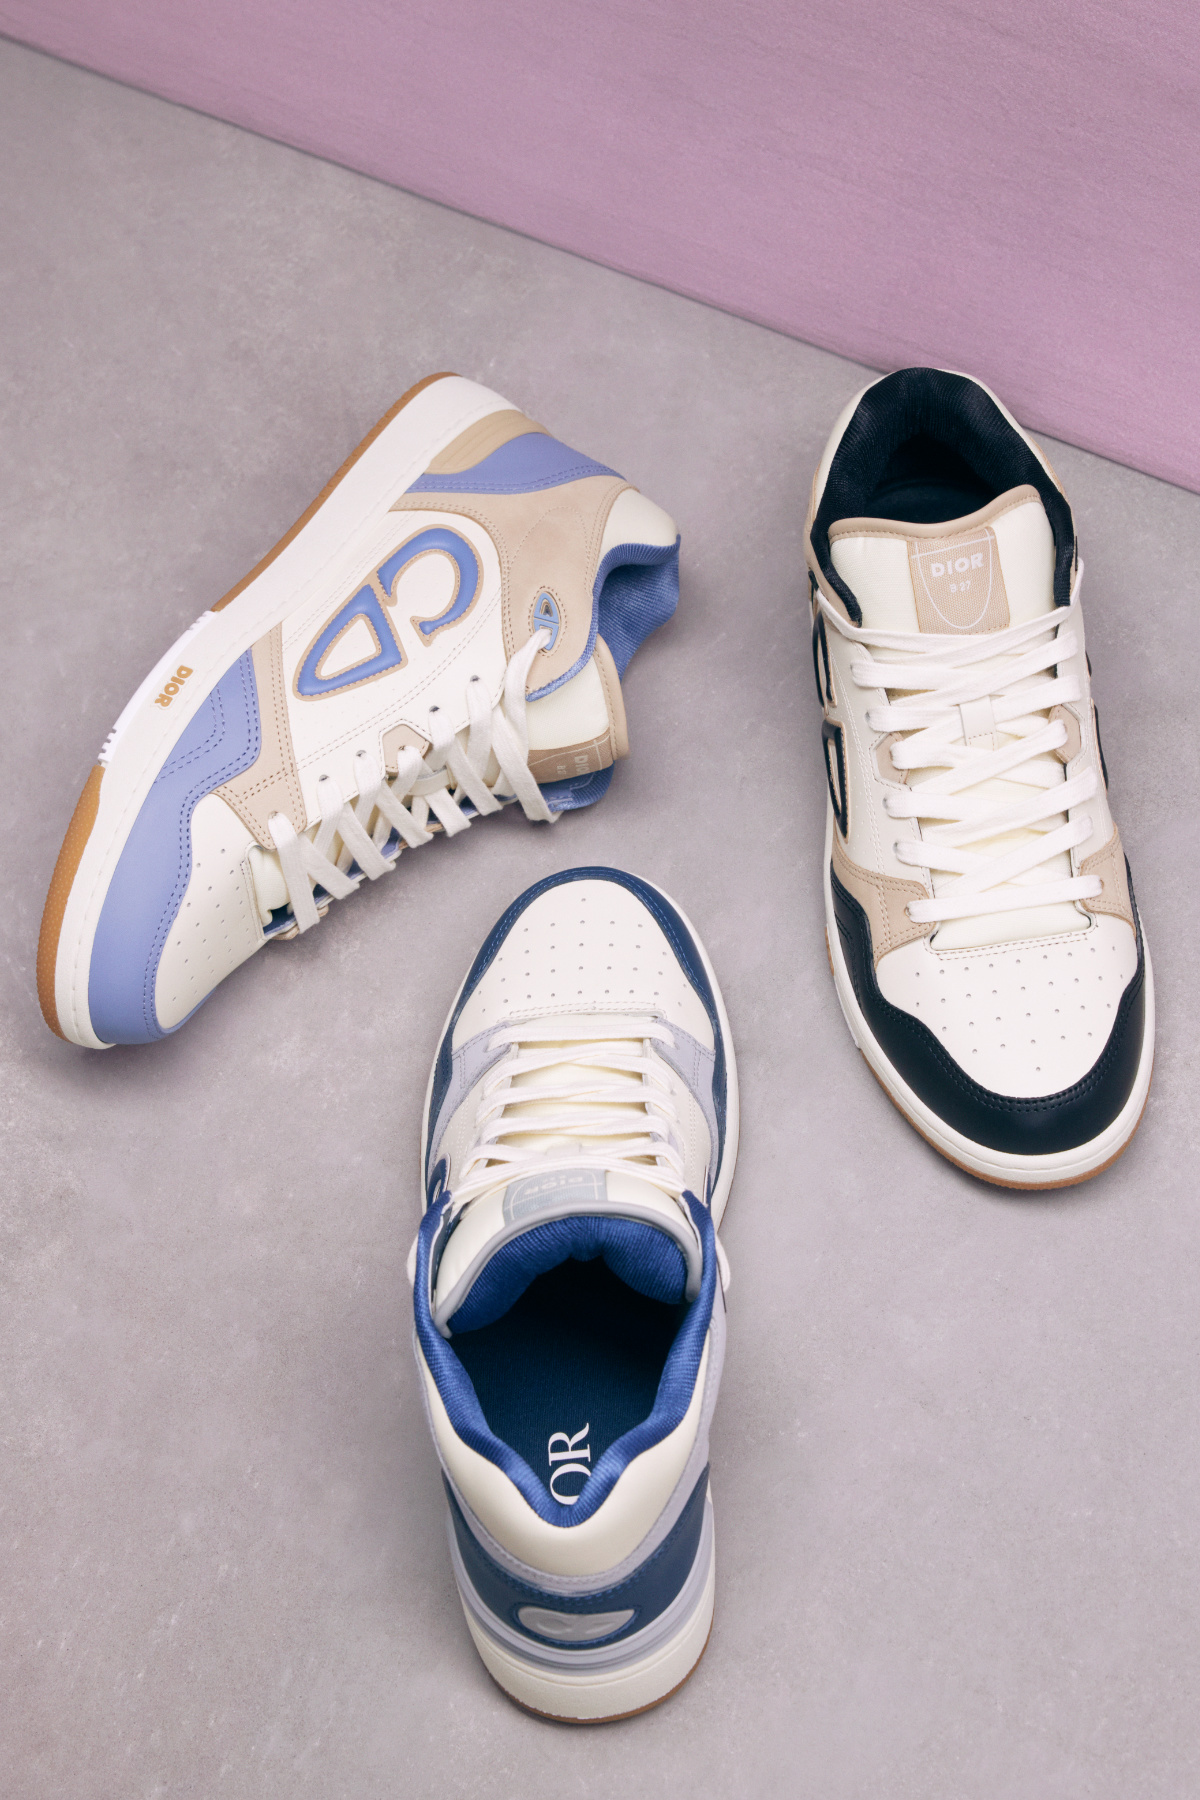 Dior has revealed its all new B57 sneaker.